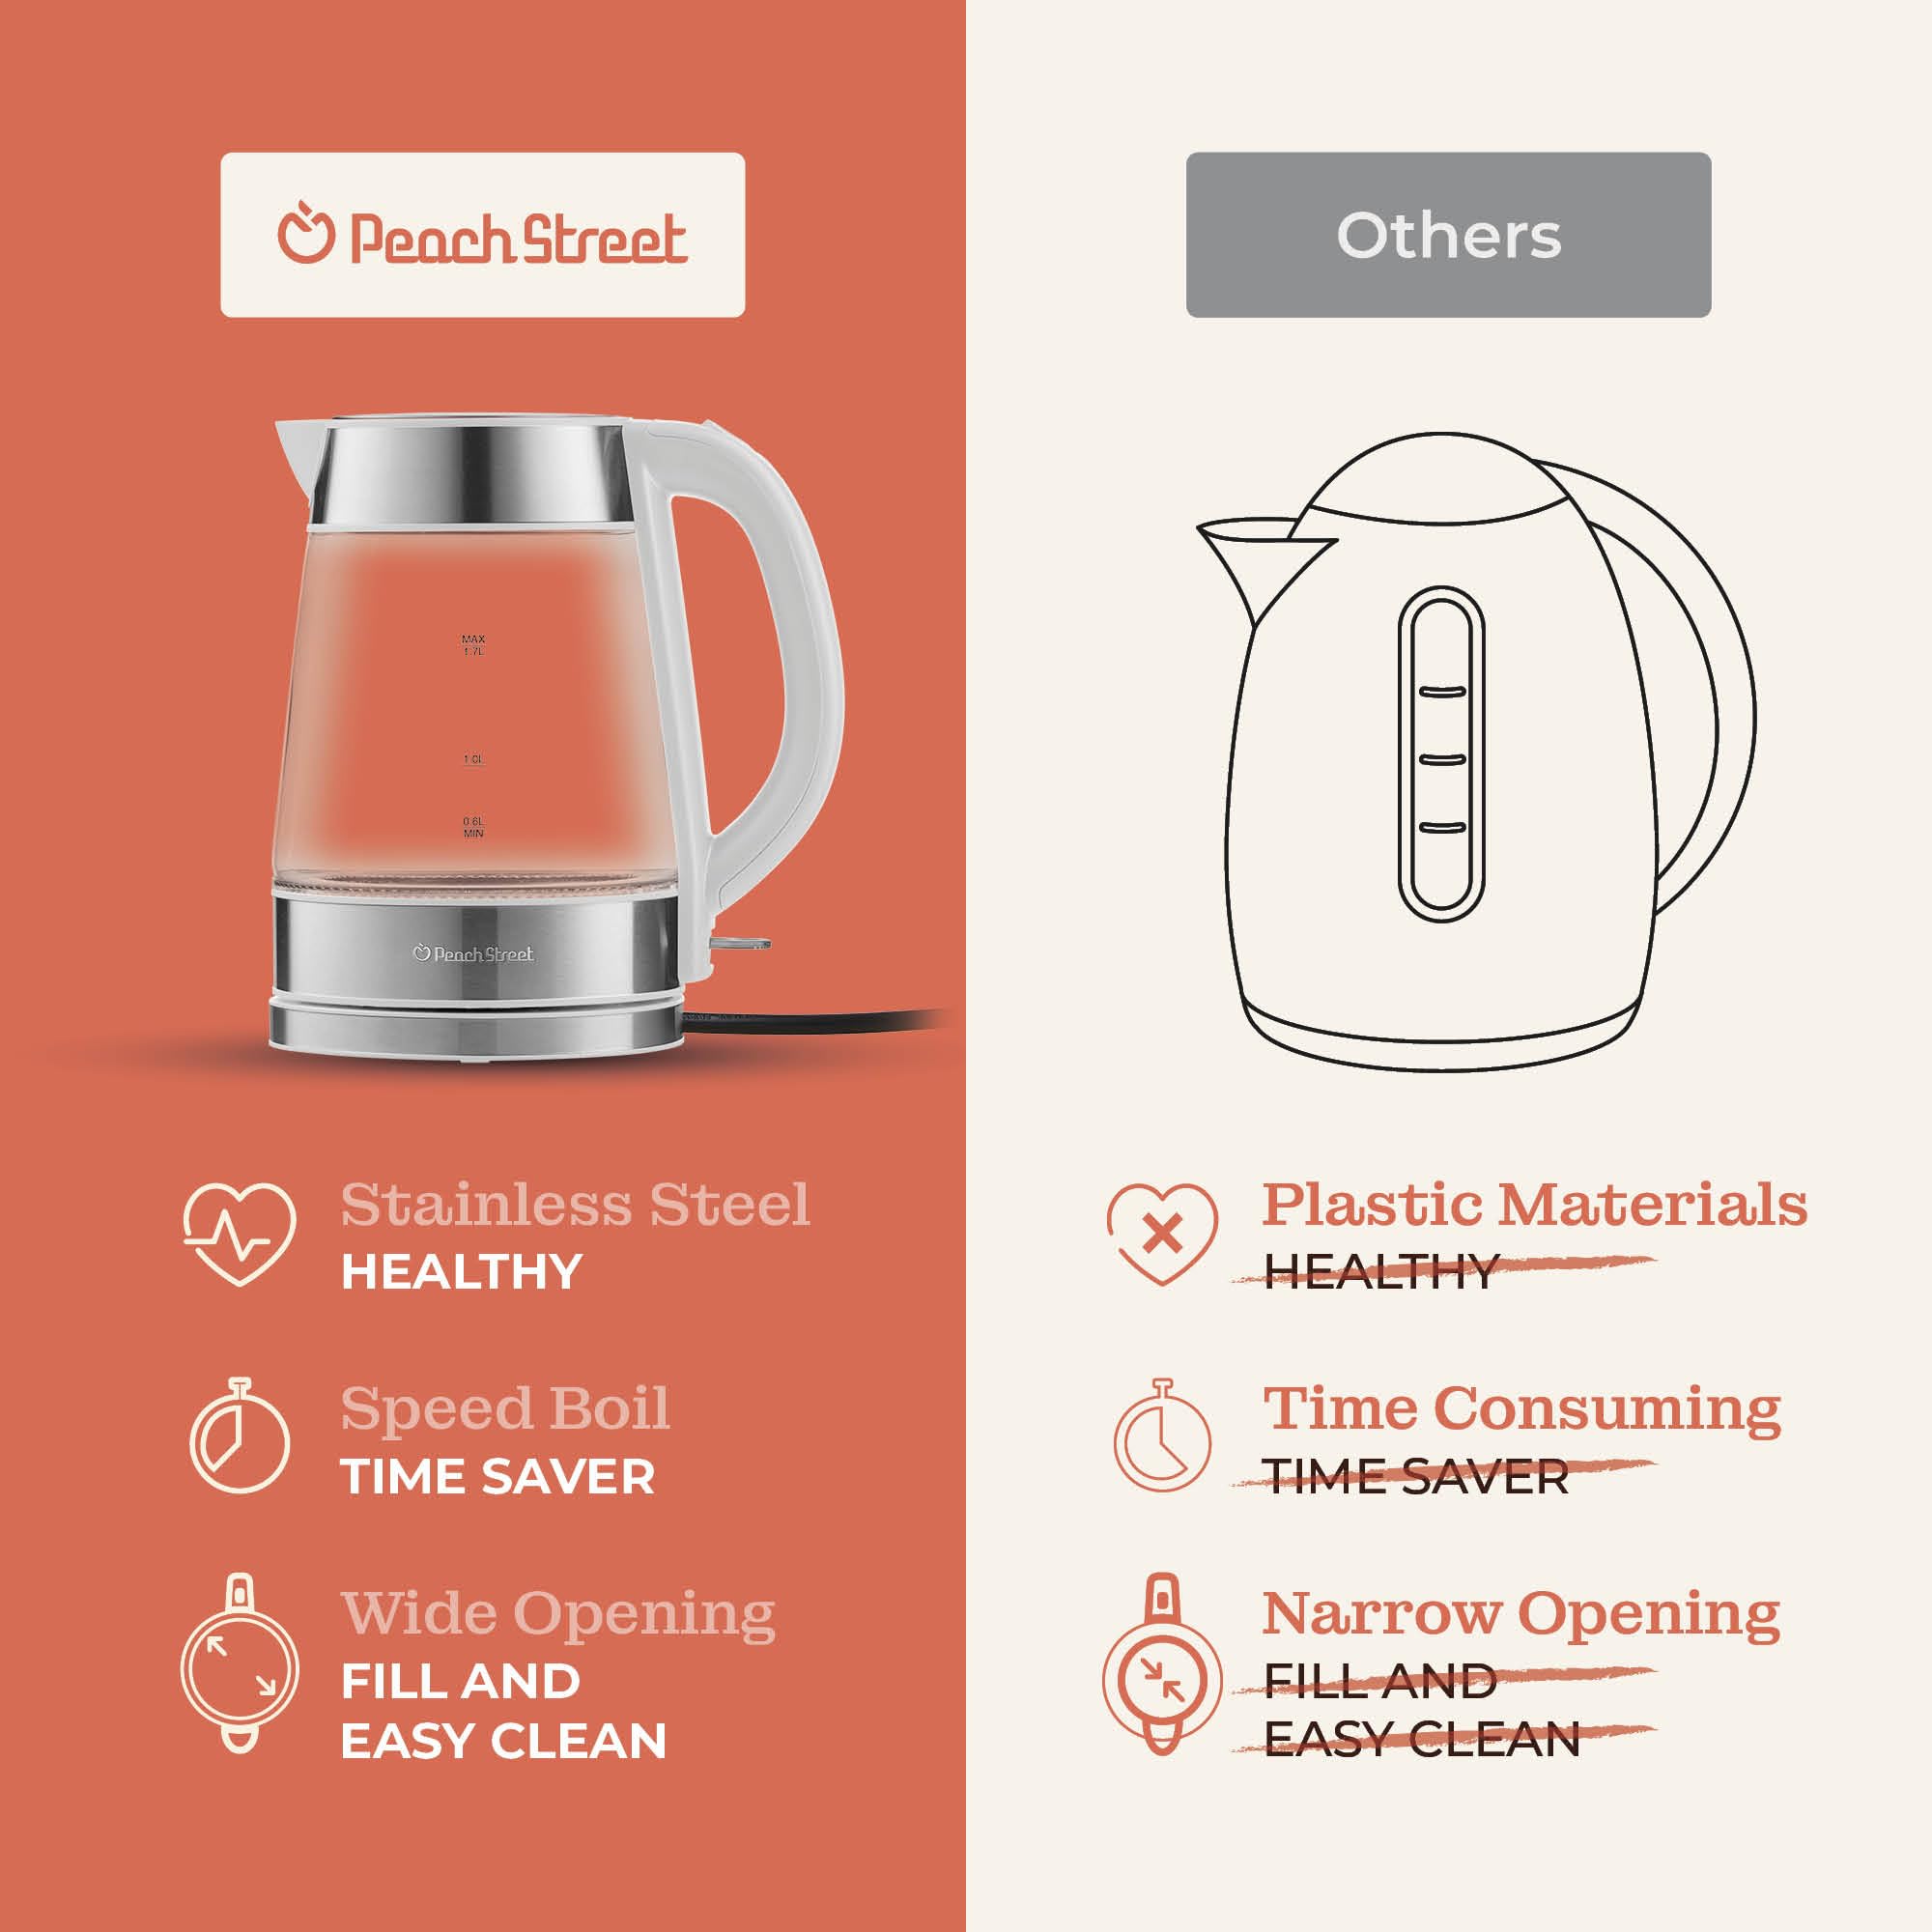 Speed-Boil Water Electric Kettle, 1.7L 1500W, Coffee & Tea Kettle Borosilicate Glass, Water Boiler, Auto Shut-Off, Cool Touch Handle, Base Detachable, LED. 360° Rotation, Boil Dry Protection (White)